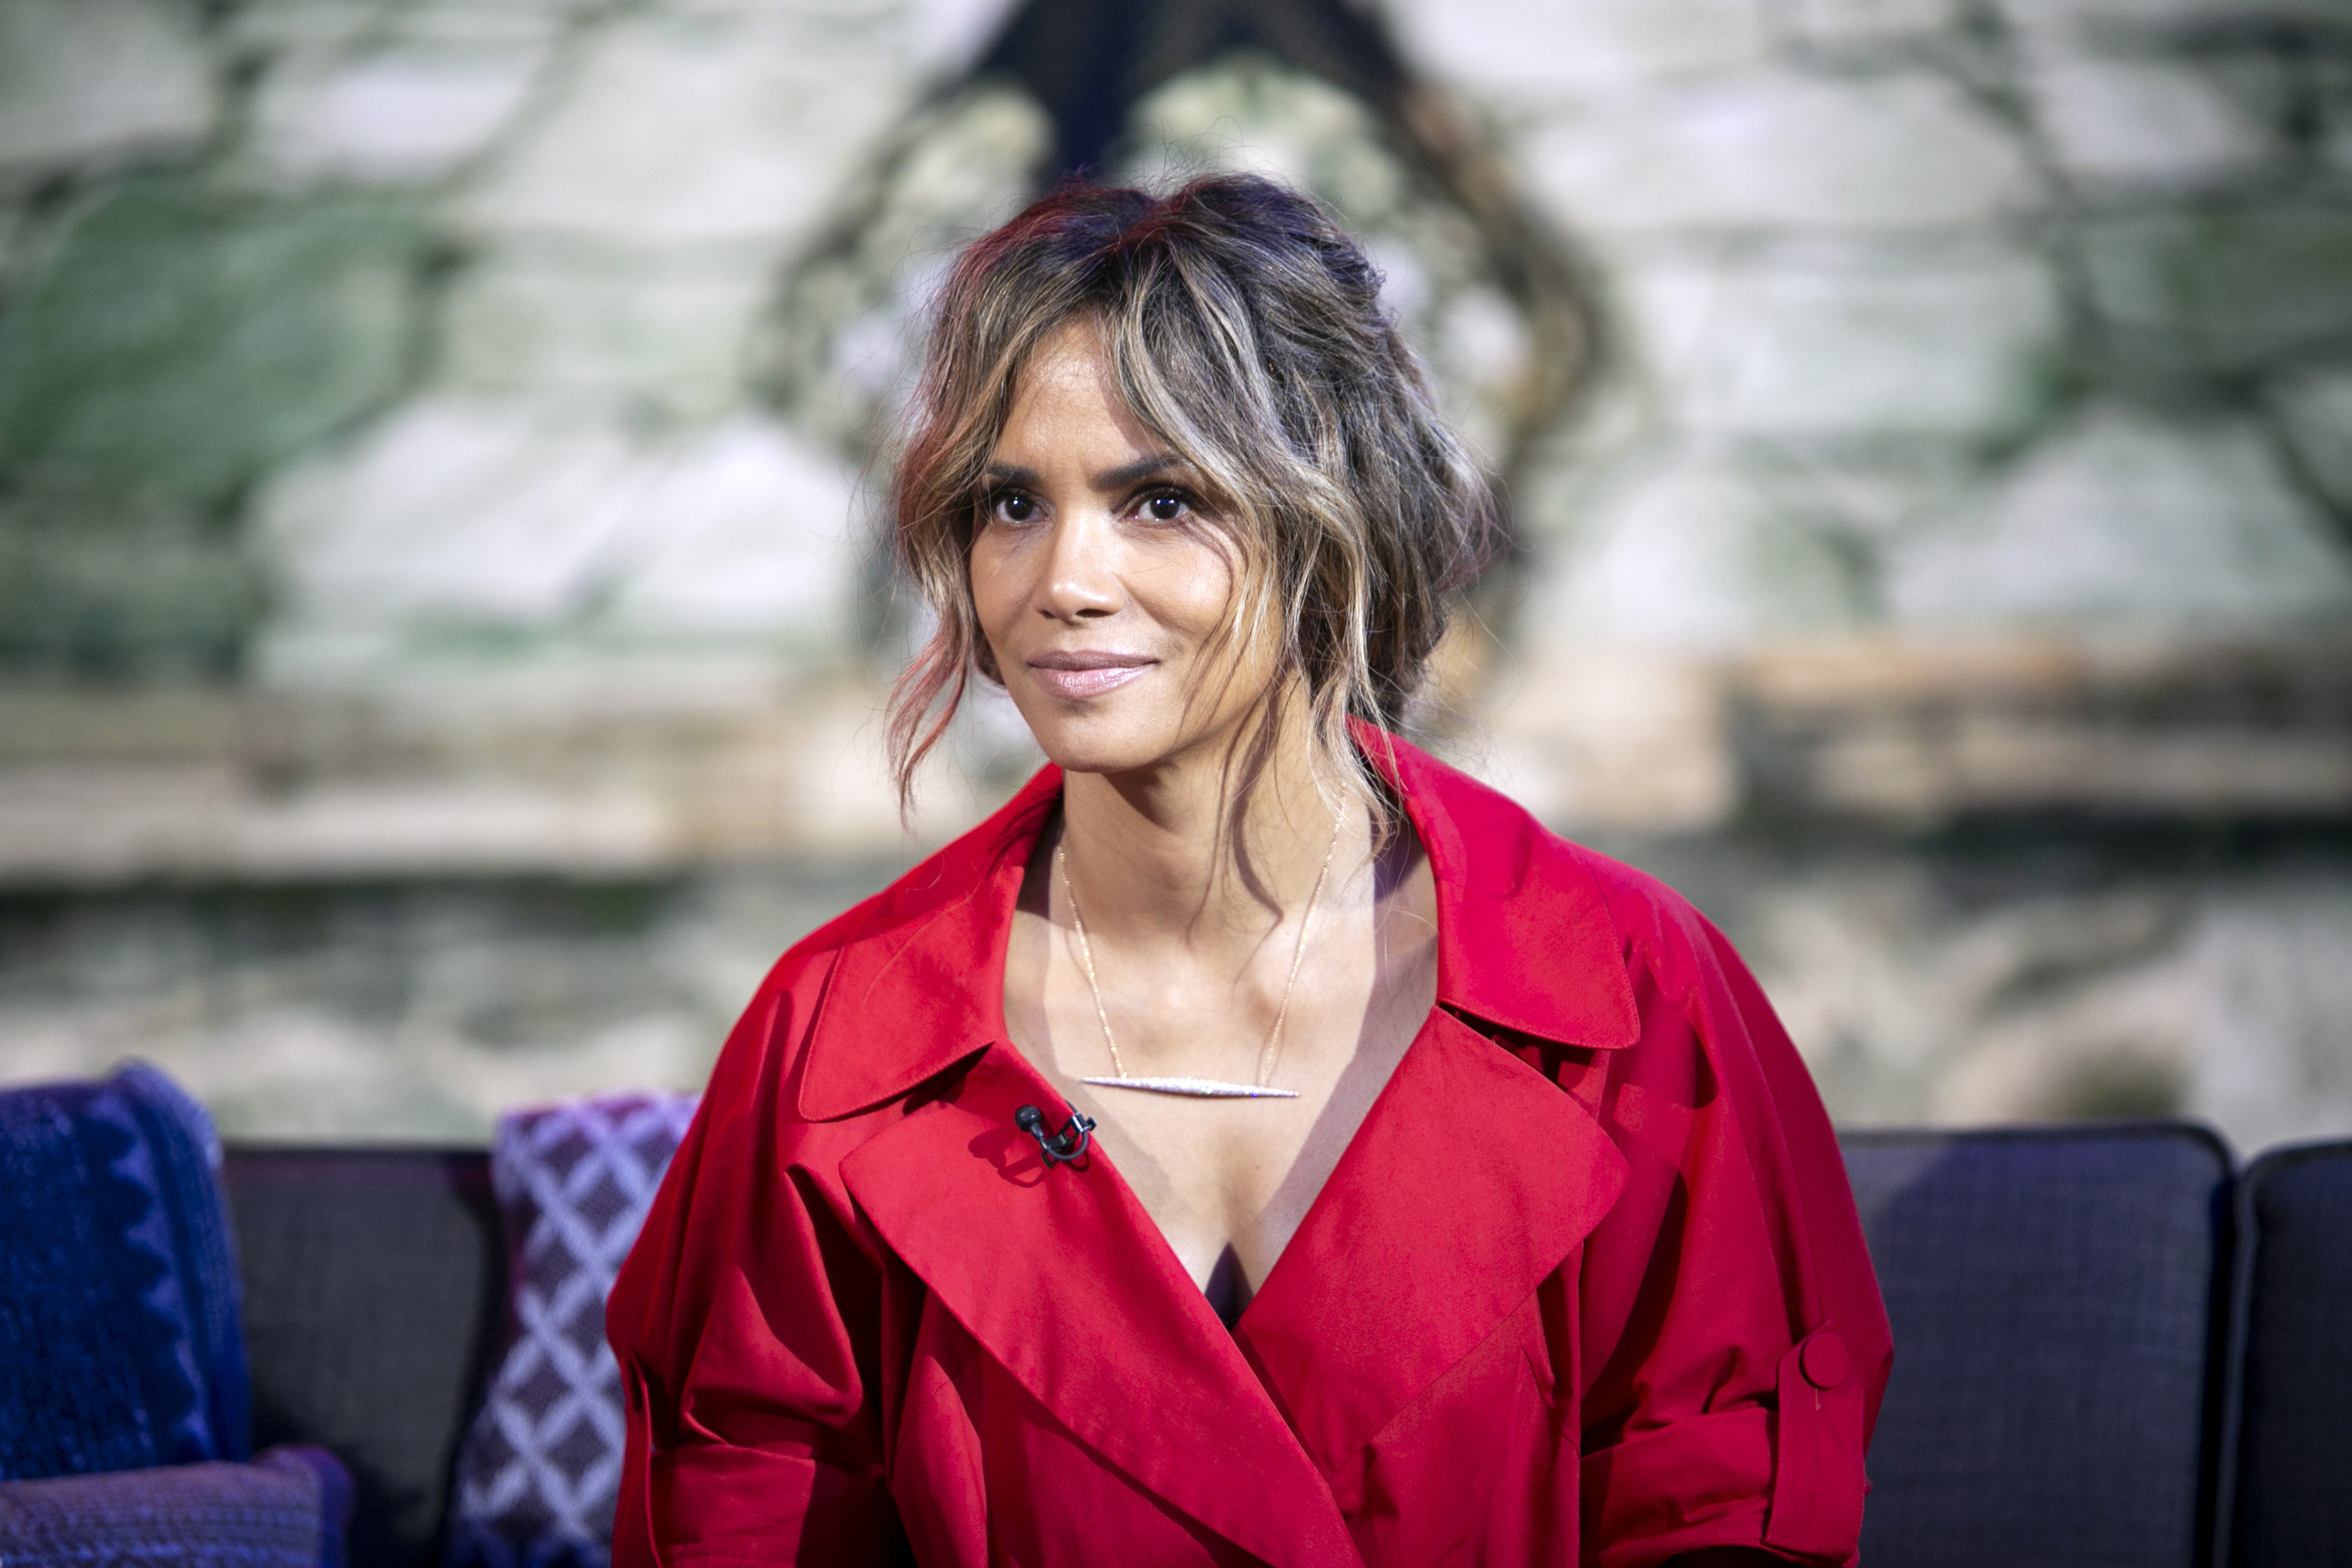 Halle Berry on TODAY wearing a red outfit accessorized with a necklace and most of hair swept back